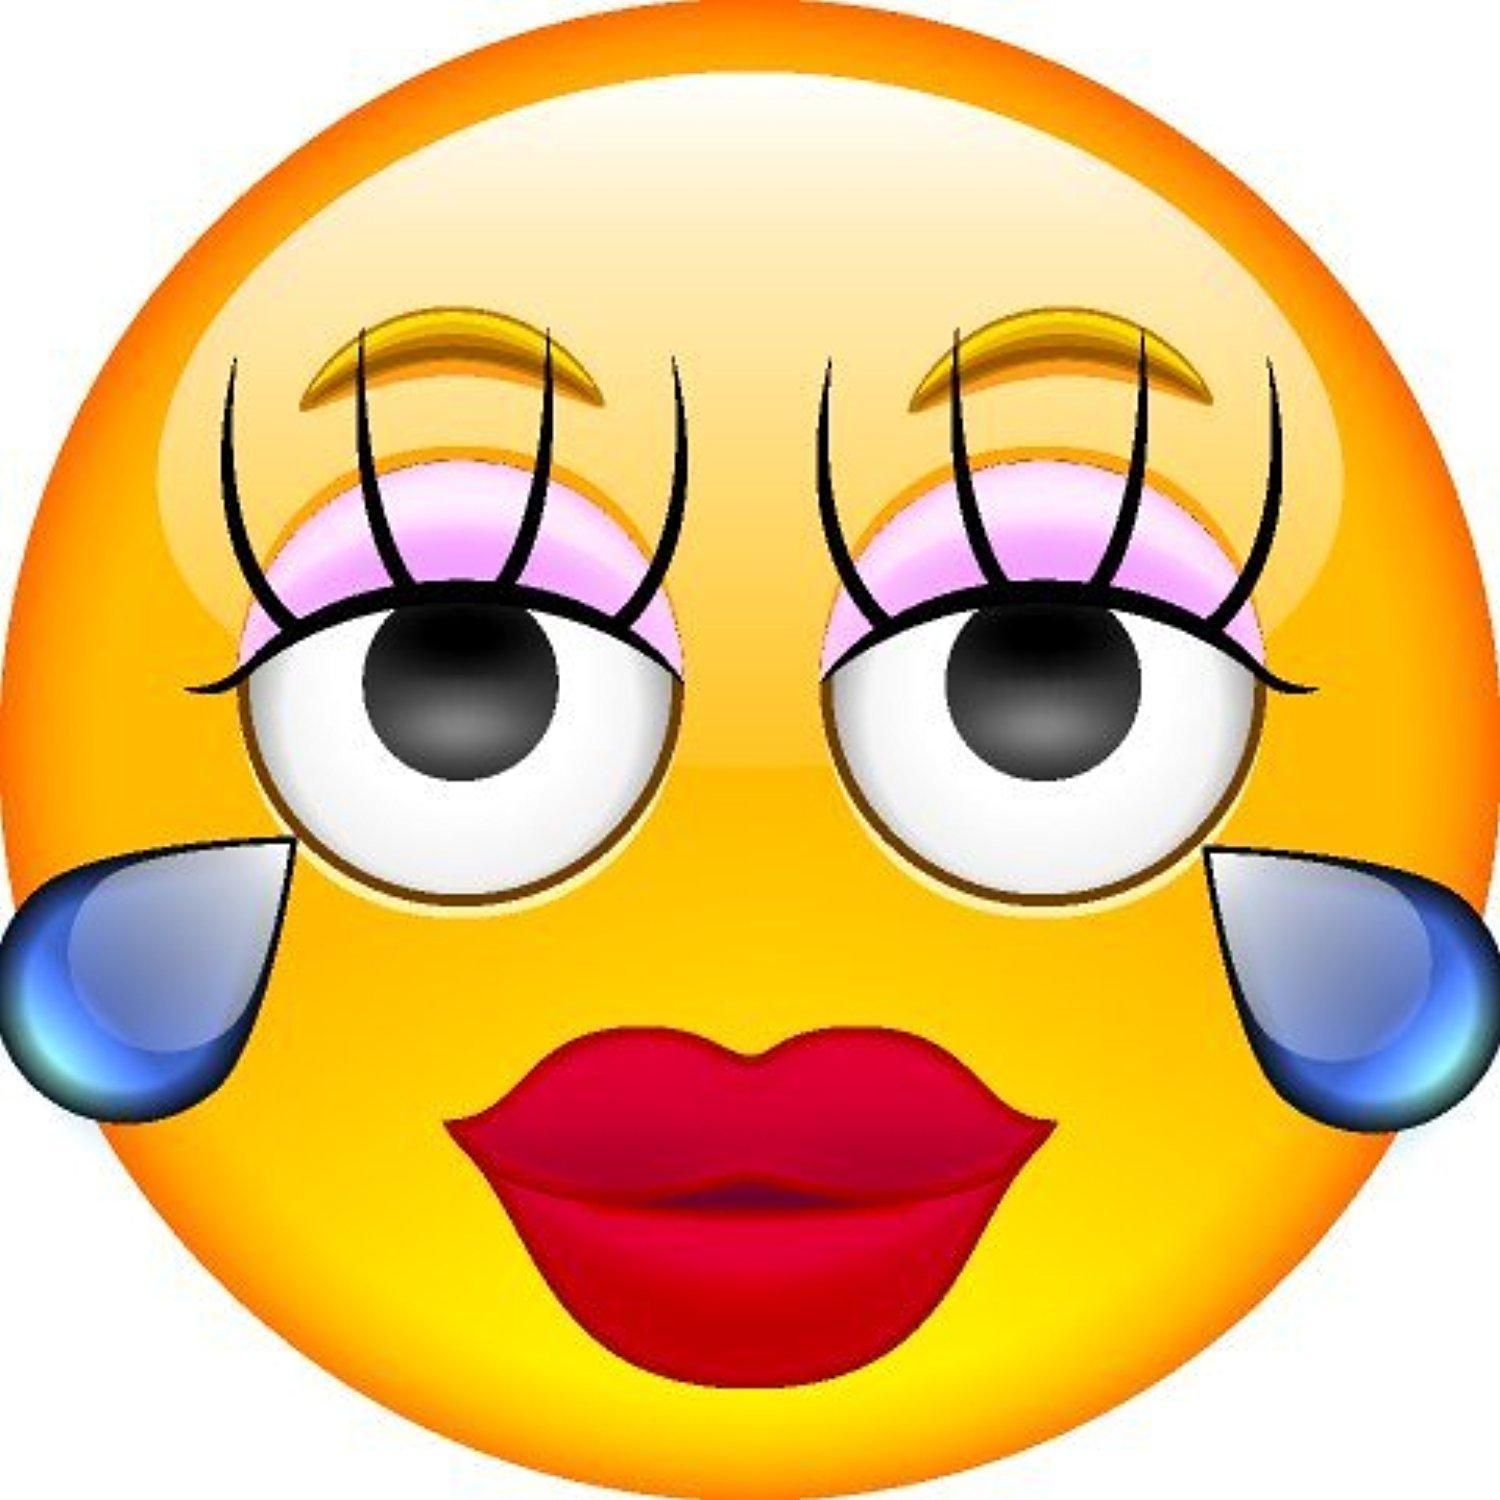 Smiley Face Emoji - Beauty Kiss With Tears - Latest & Top Rated